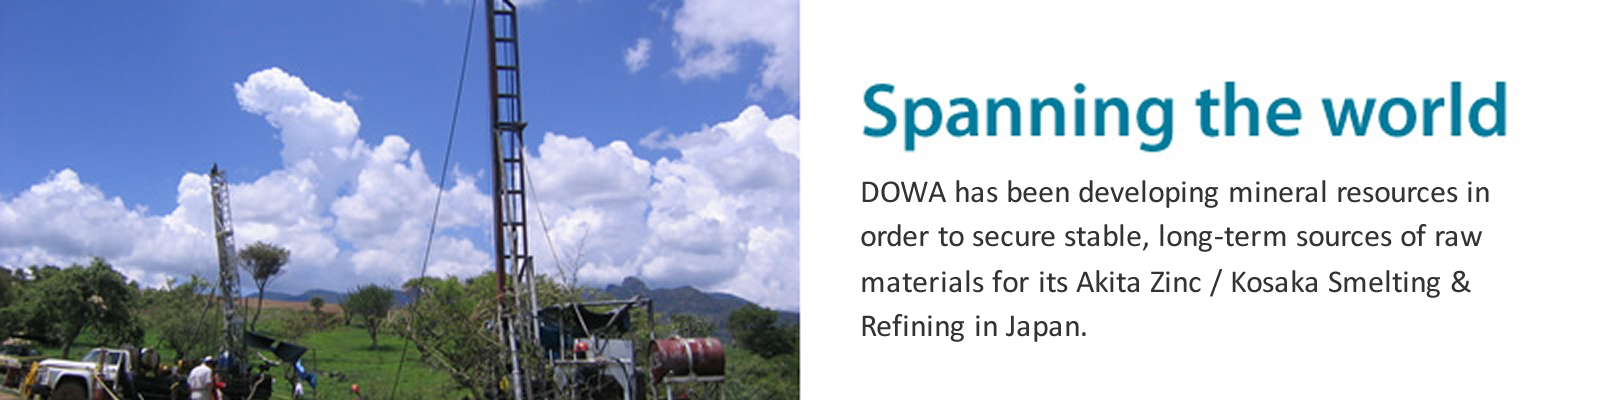 Spanning the world   Dowa has been developing mineral resources in order to secure stable, long-term sources of raw materials for its Akita Zinc / Kosaka / Onahama Smelting & Refining in Japan